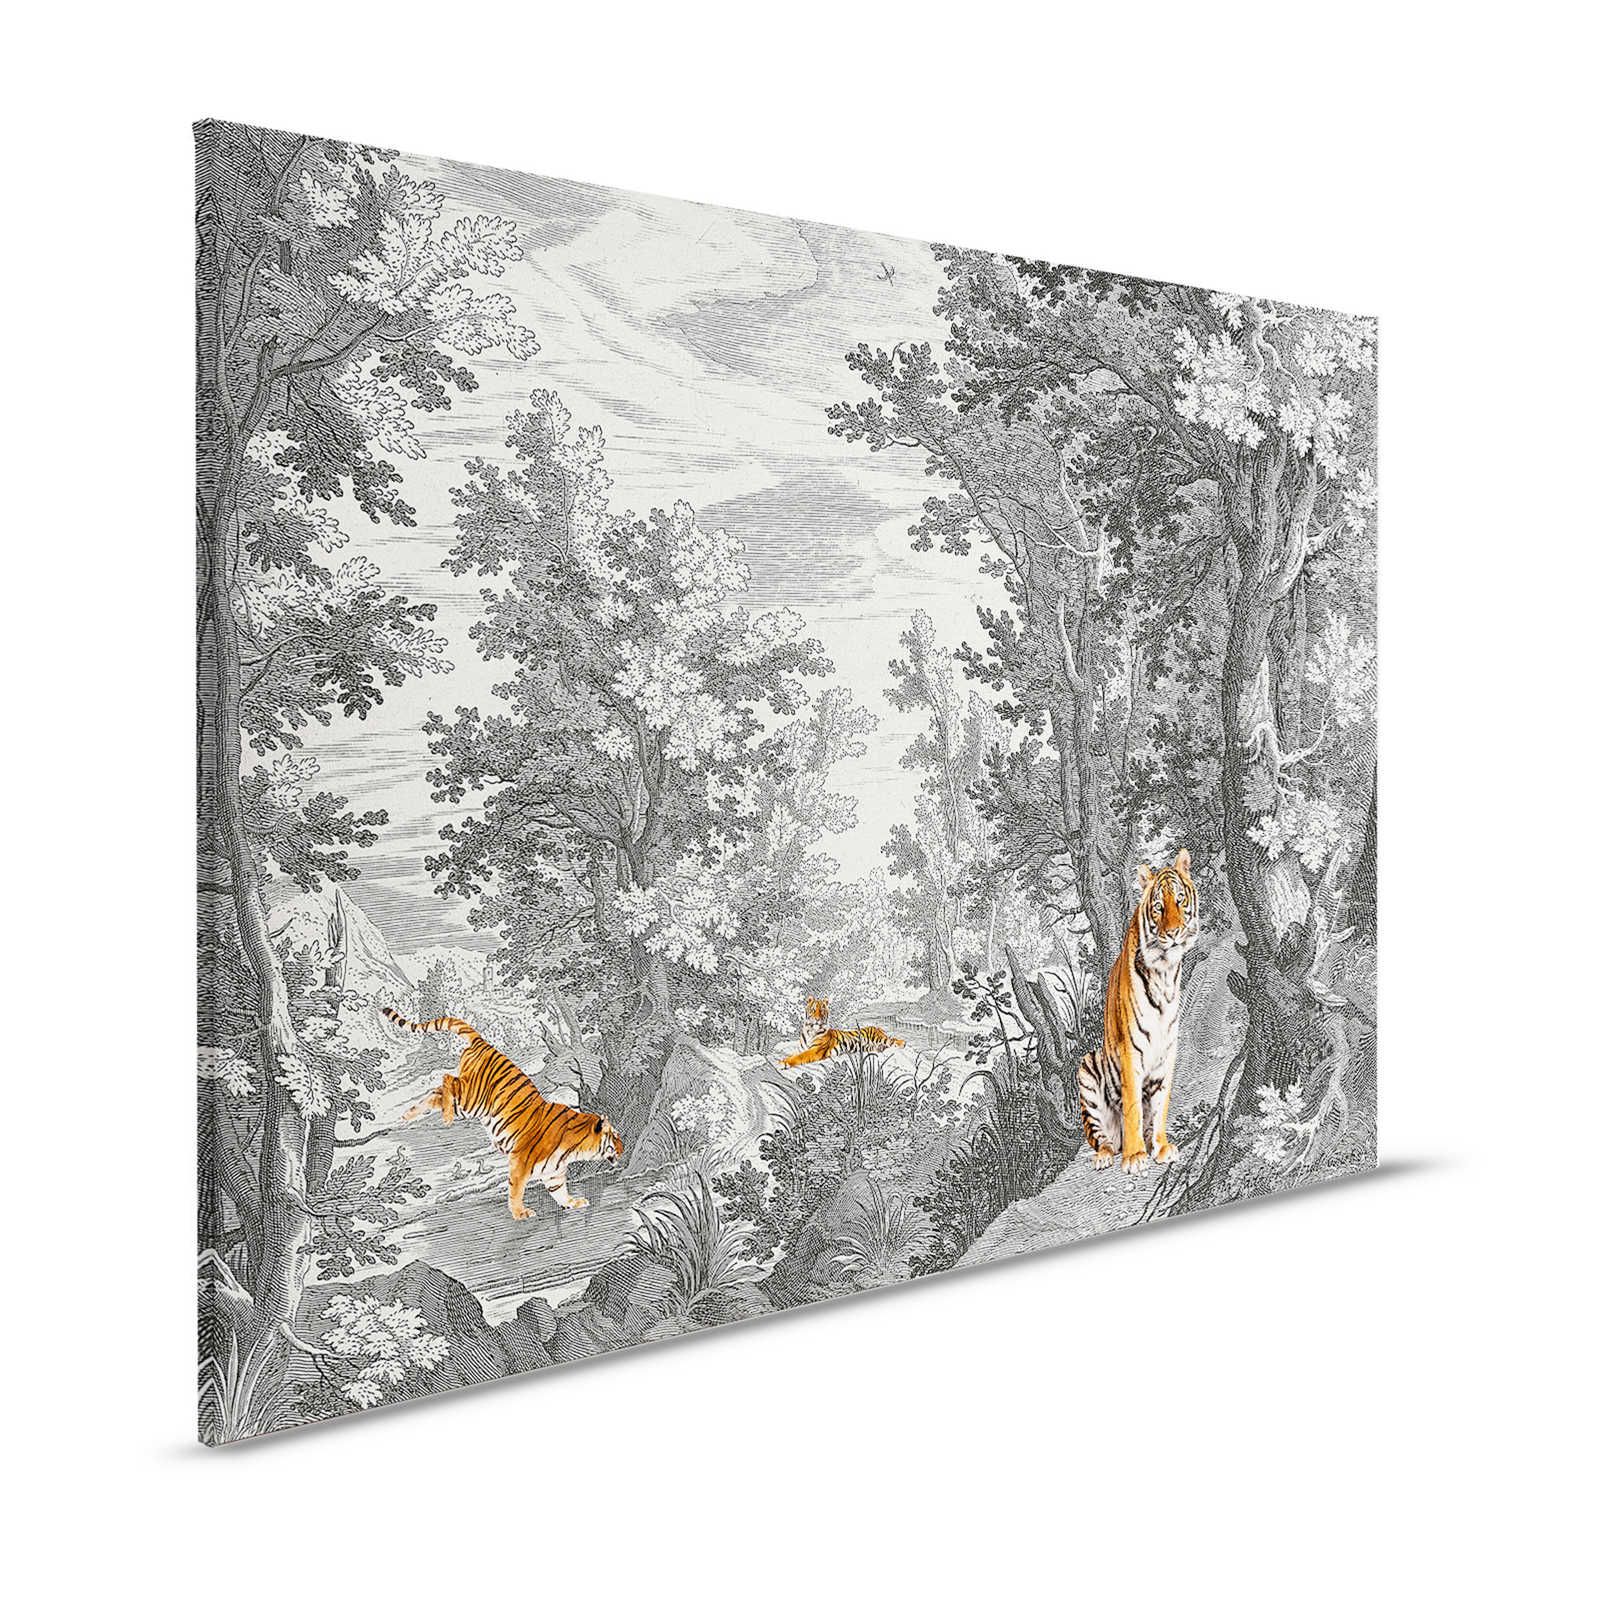 Fancy Forest 2 - Canvas painting Classic Landscape with Tiger - 1,20 m x 0,80 m
